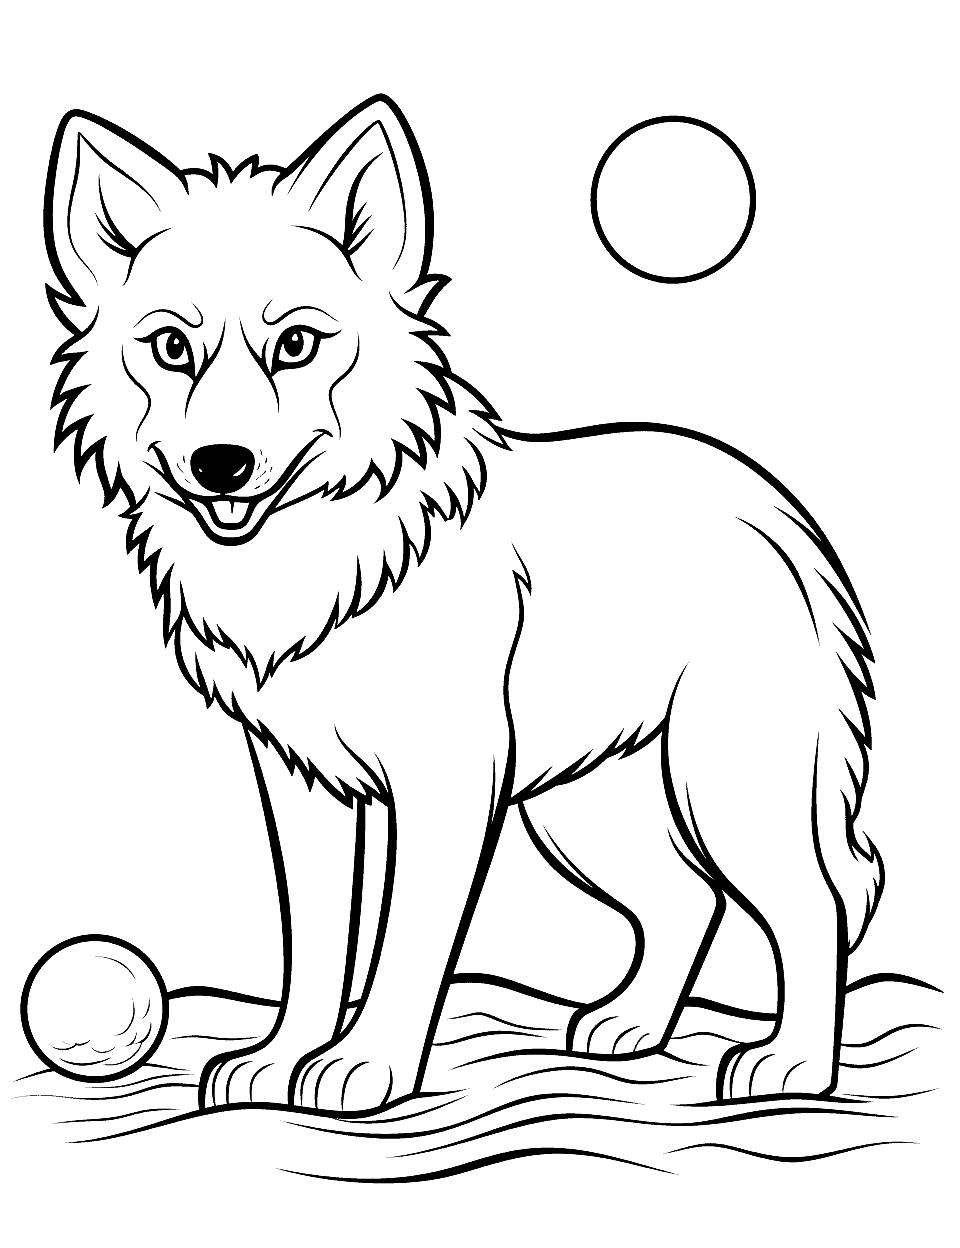 Wolf's Beach Day Wolf Coloring Page - A wolf pup playing with a beach ball on a sunny day.